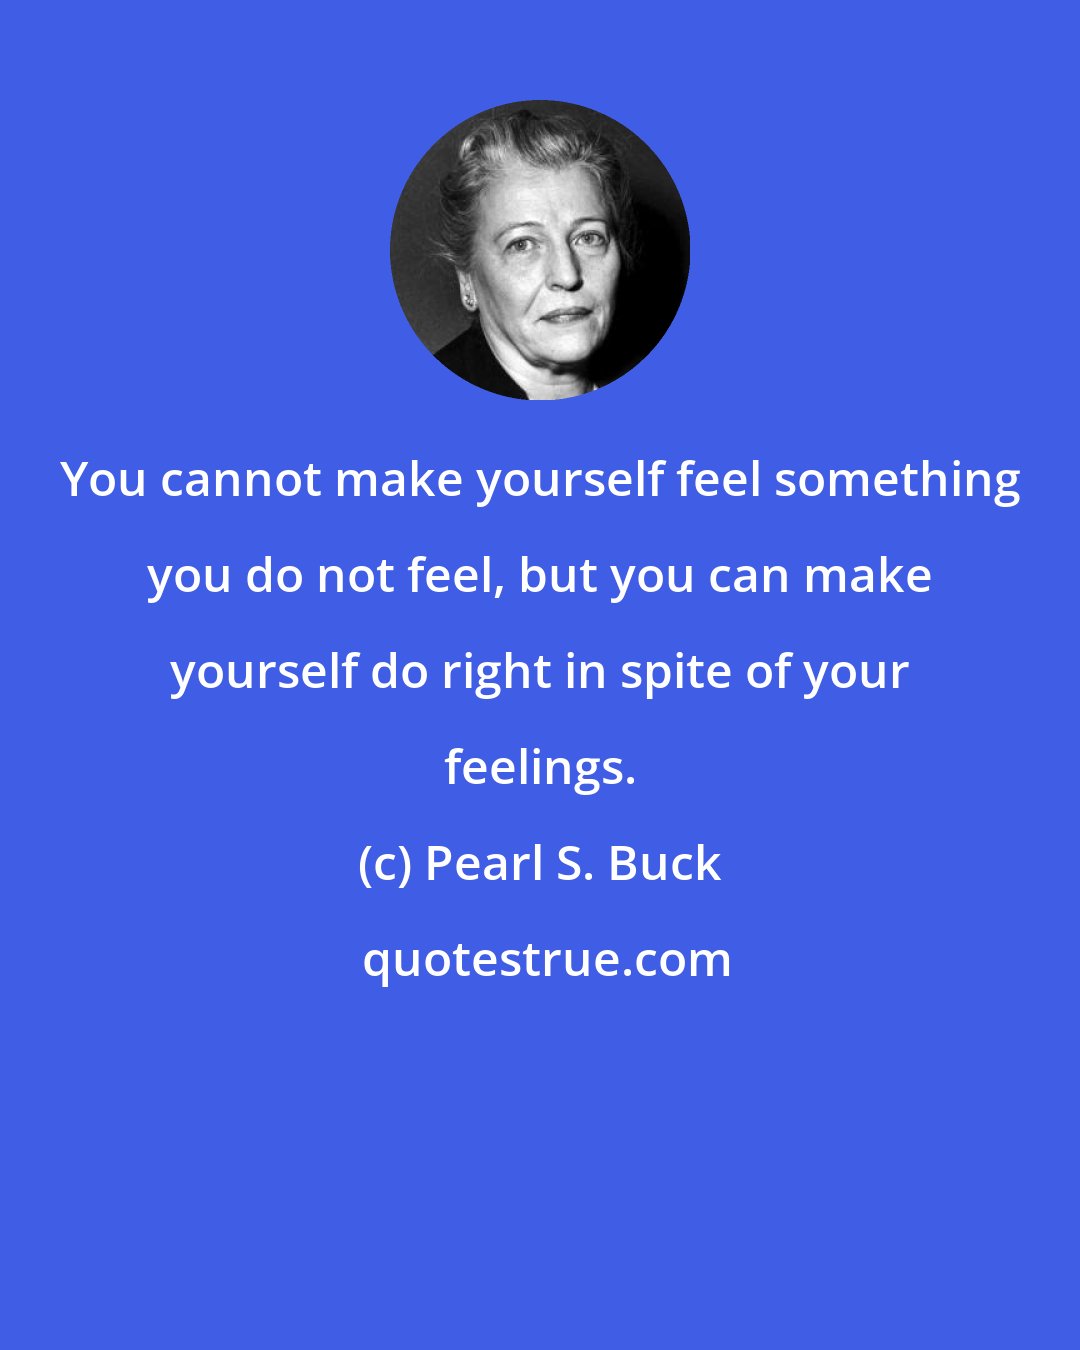 Pearl S. Buck: You cannot make yourself feel something you do not feel, but you can make yourself do right in spite of your feelings.